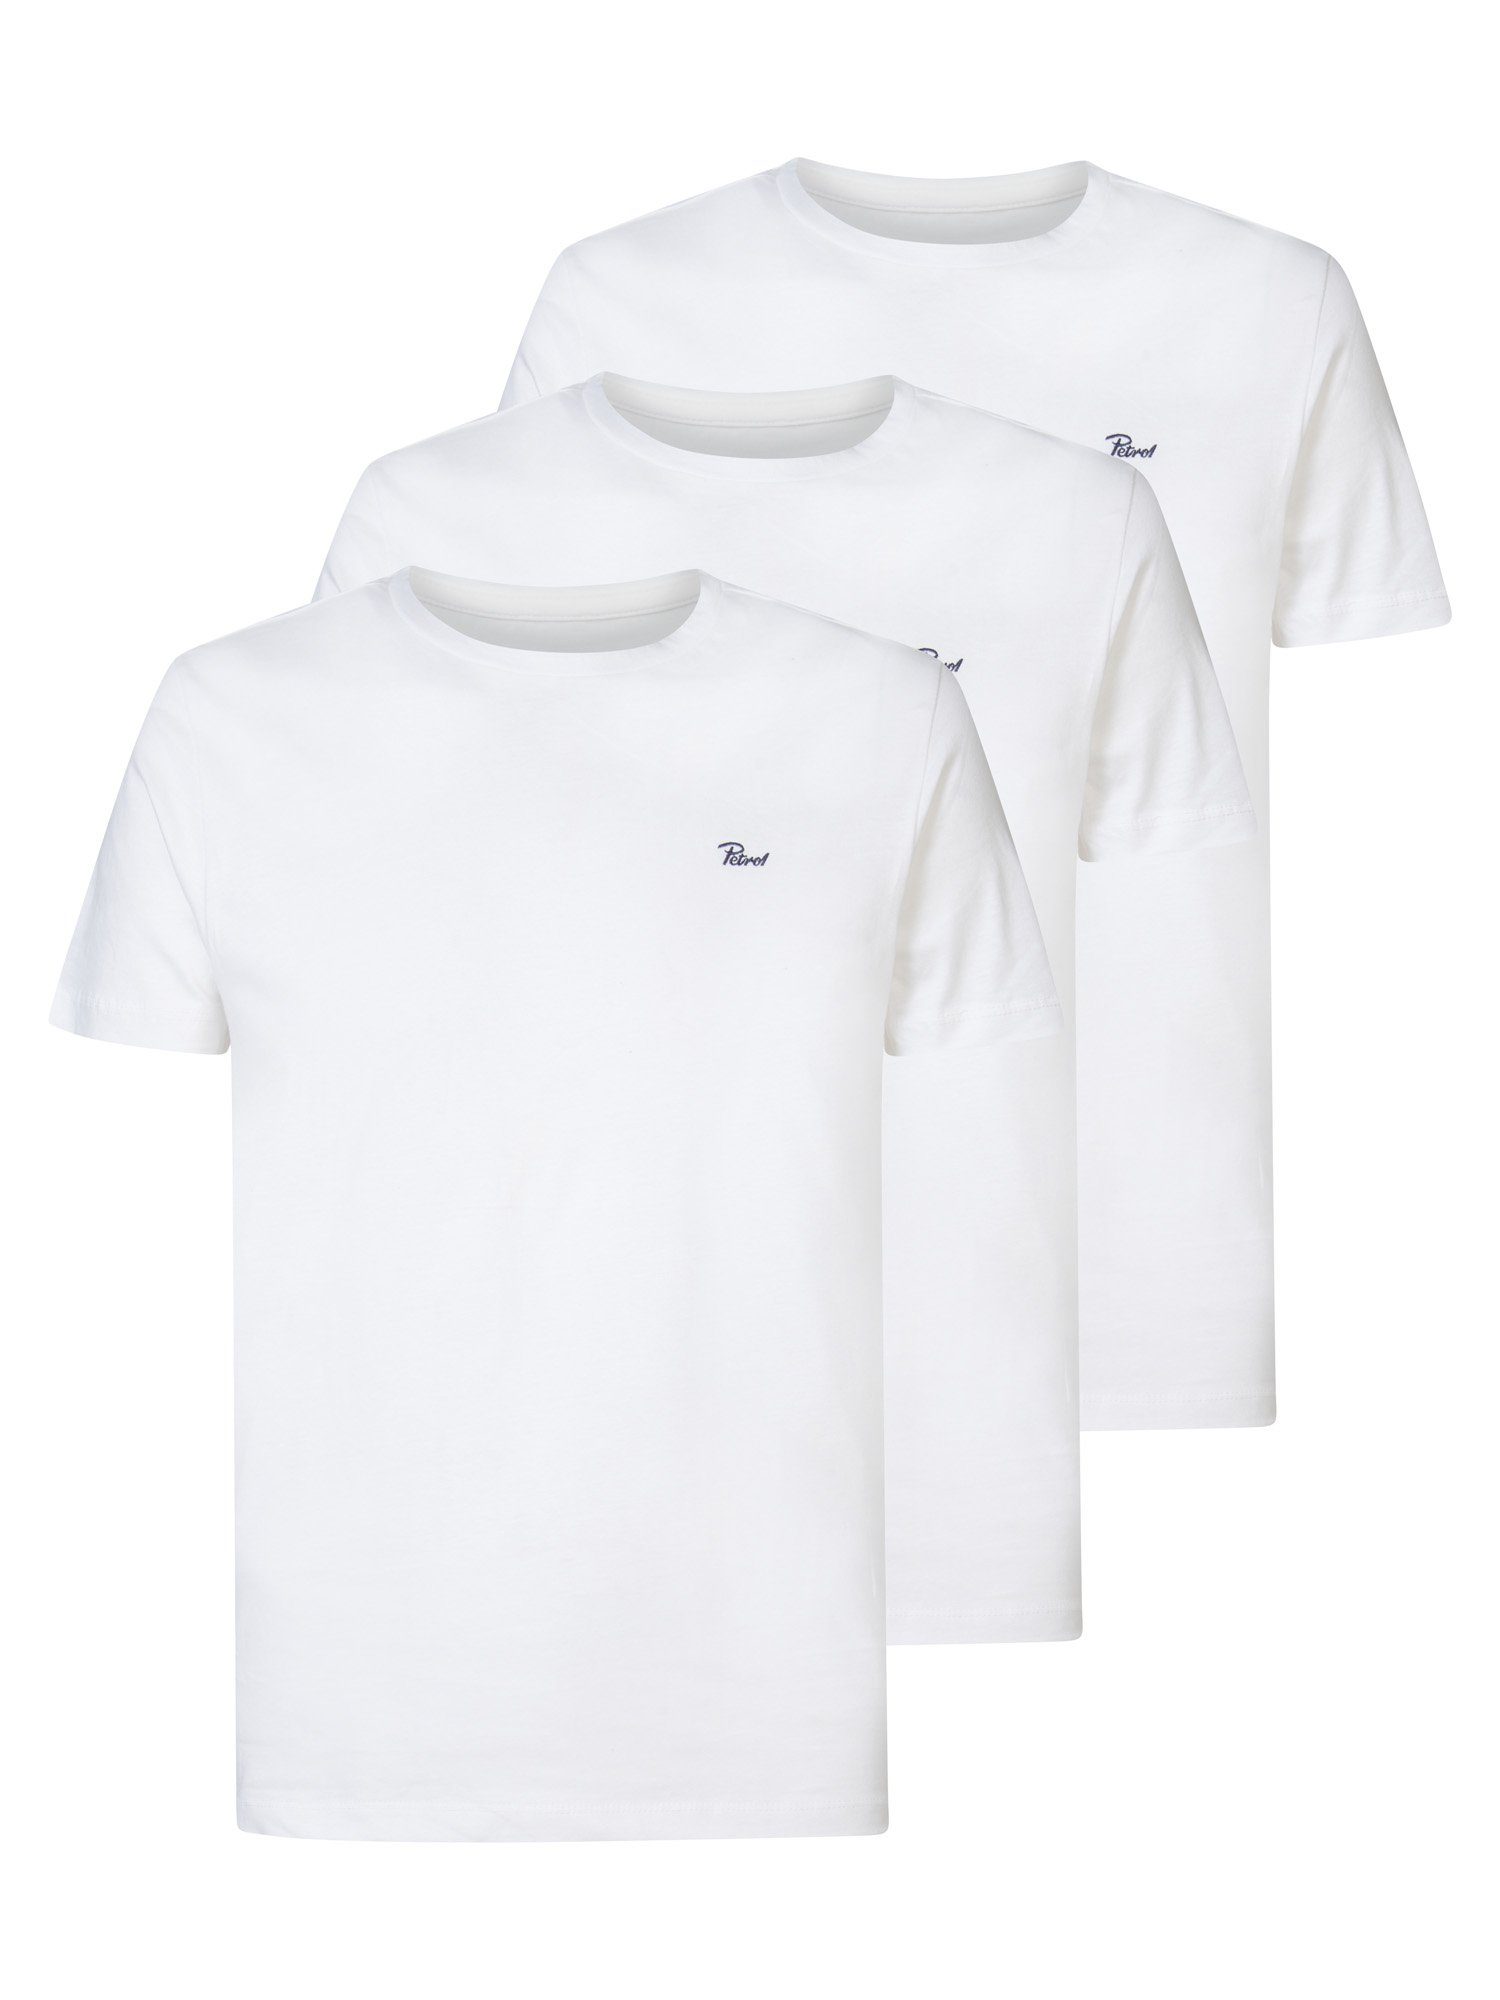 3er-Pack) (Packung, bright 3-tlg., Petrol Industries T-Shirt white